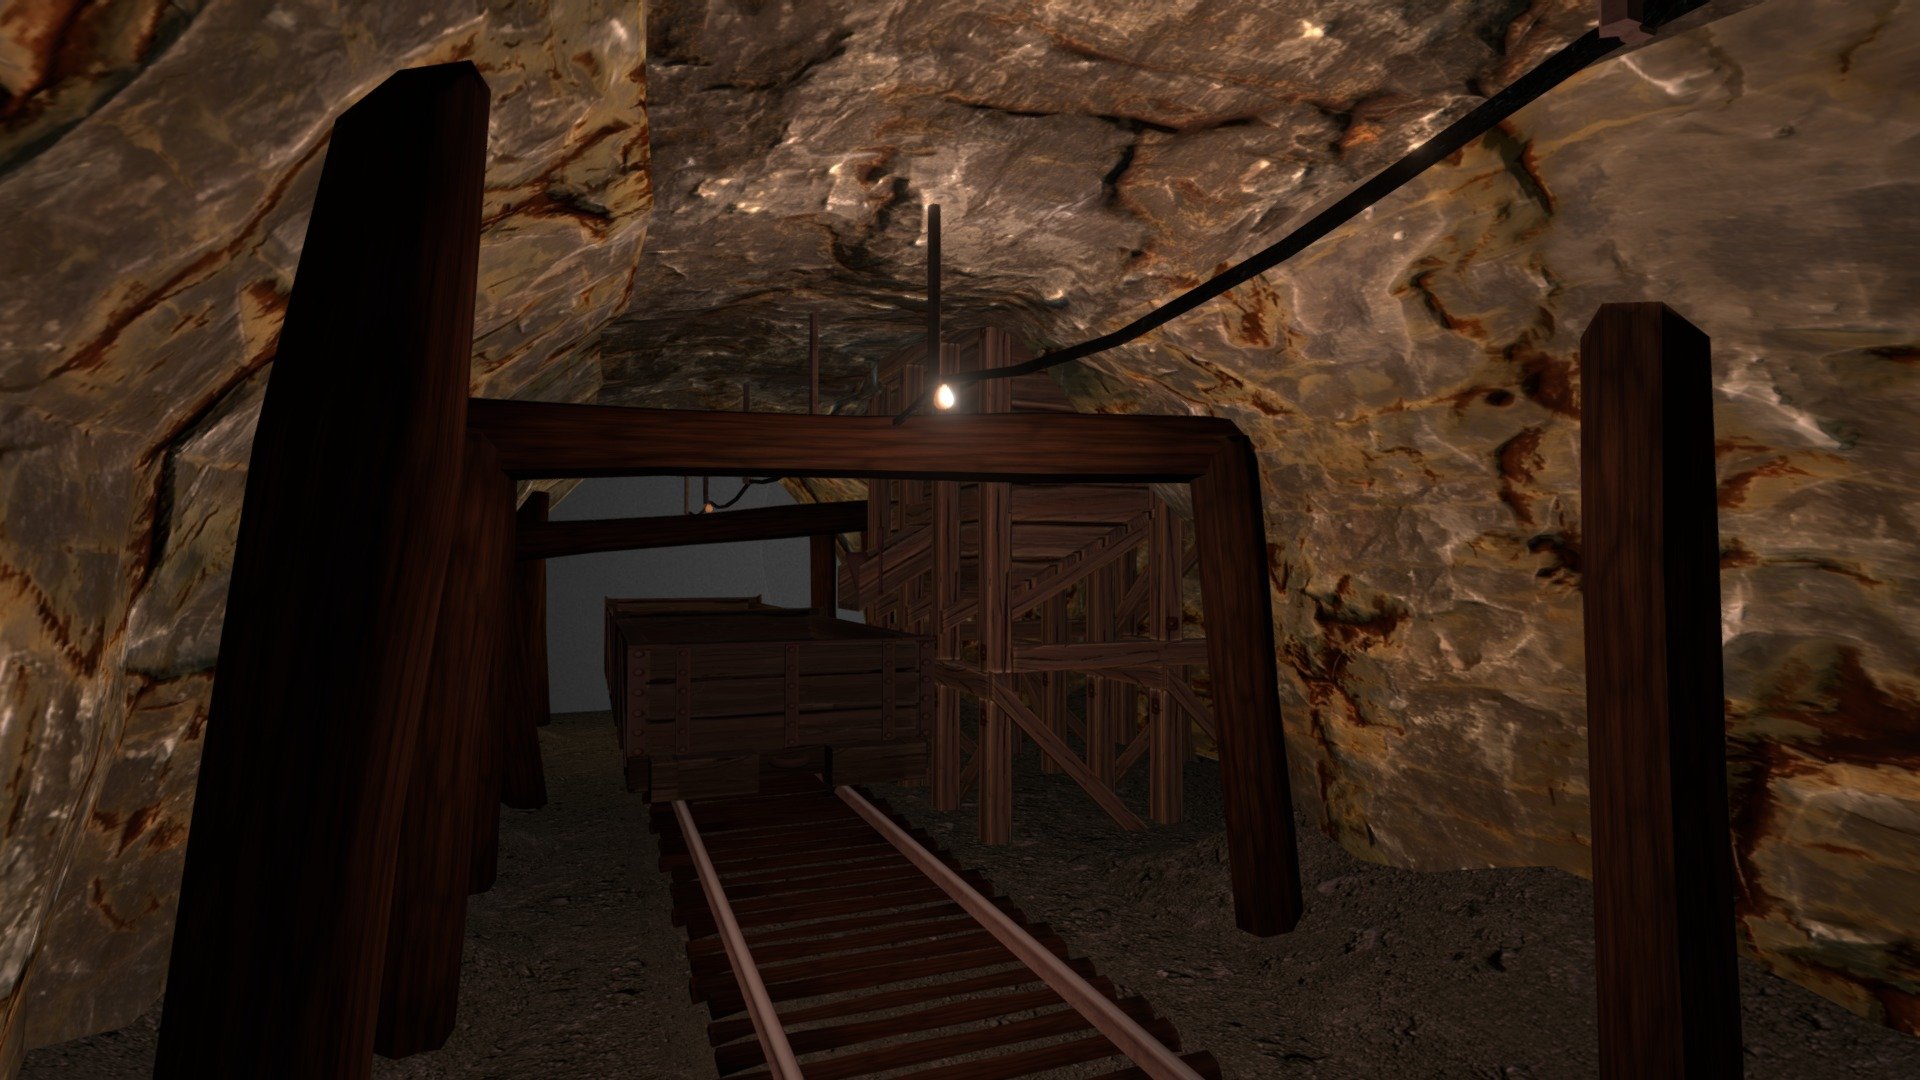 small scene from my coal mine environment recreated for sketchfab - Mine Scene - 3D model by peter54 3d model